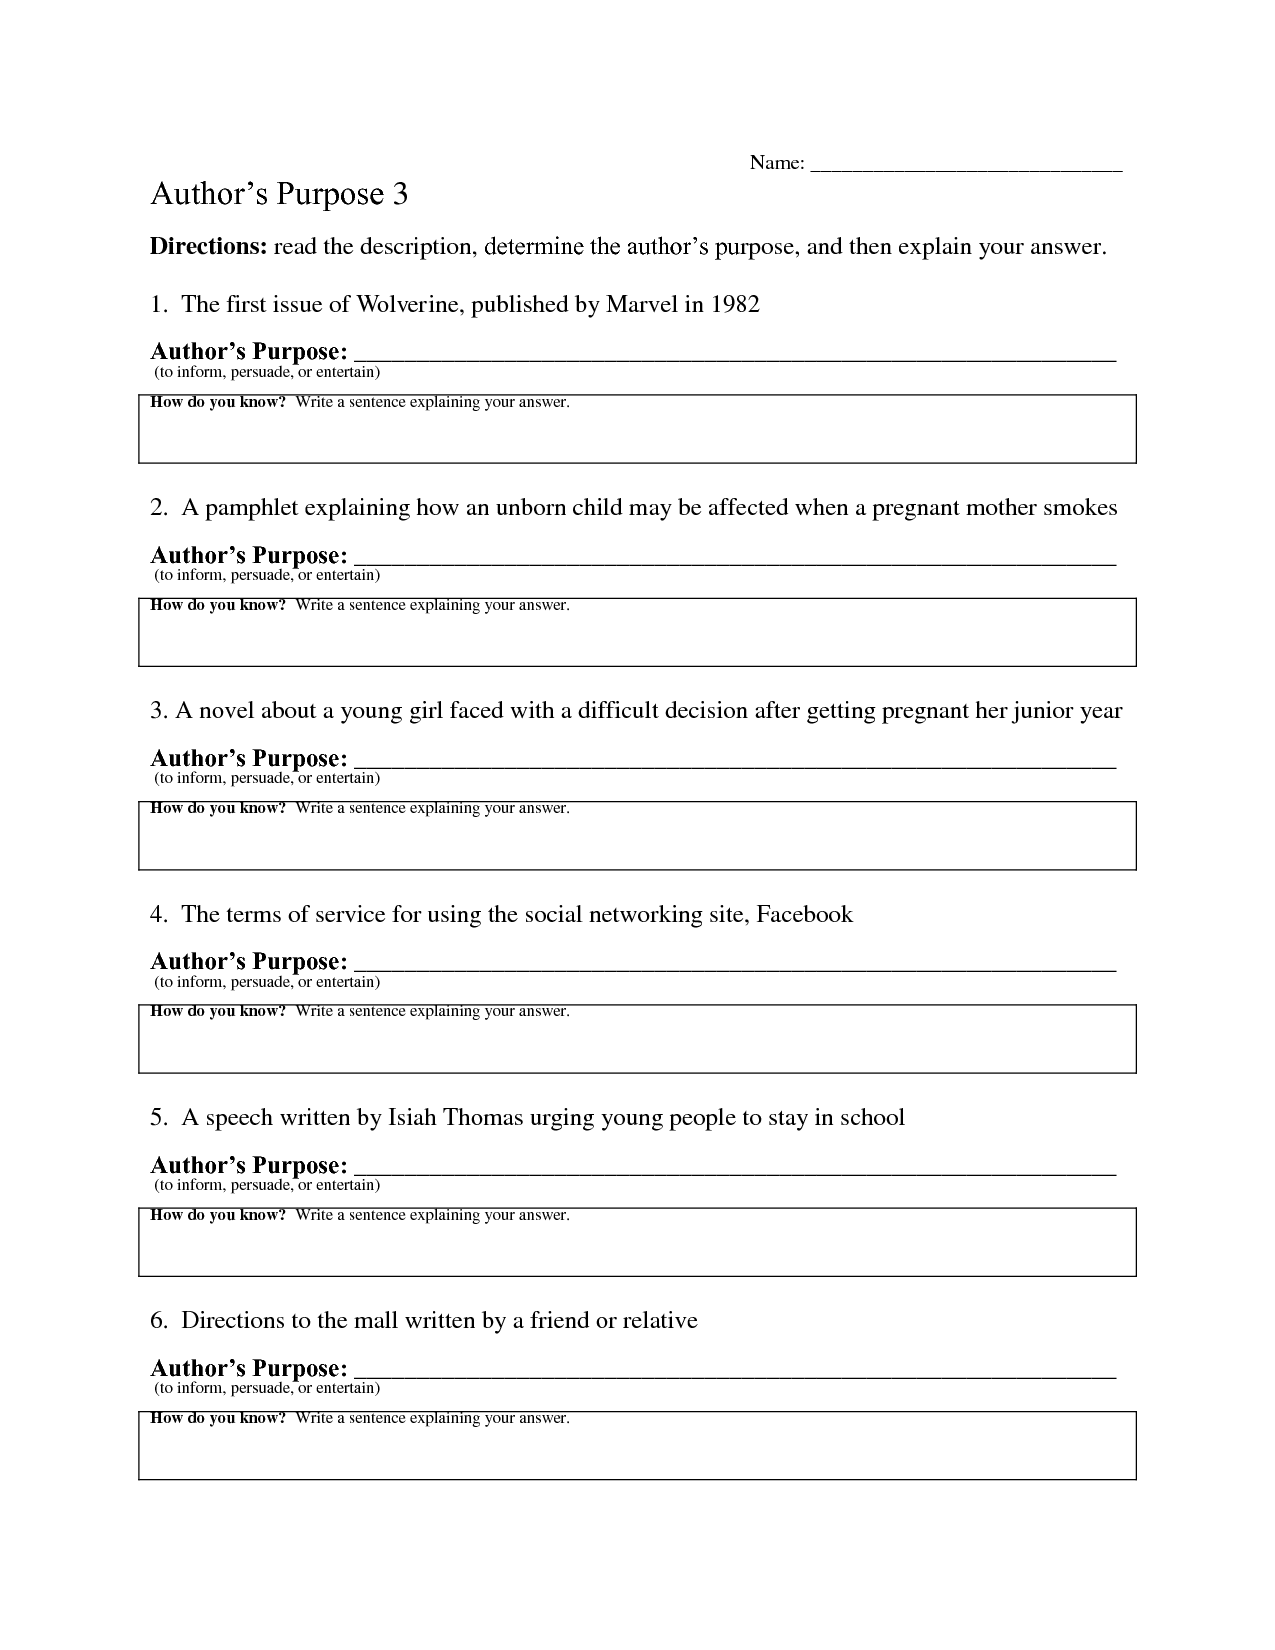 10 Best Images of Authors Purpose Worksheets 3rd Grade - Author S